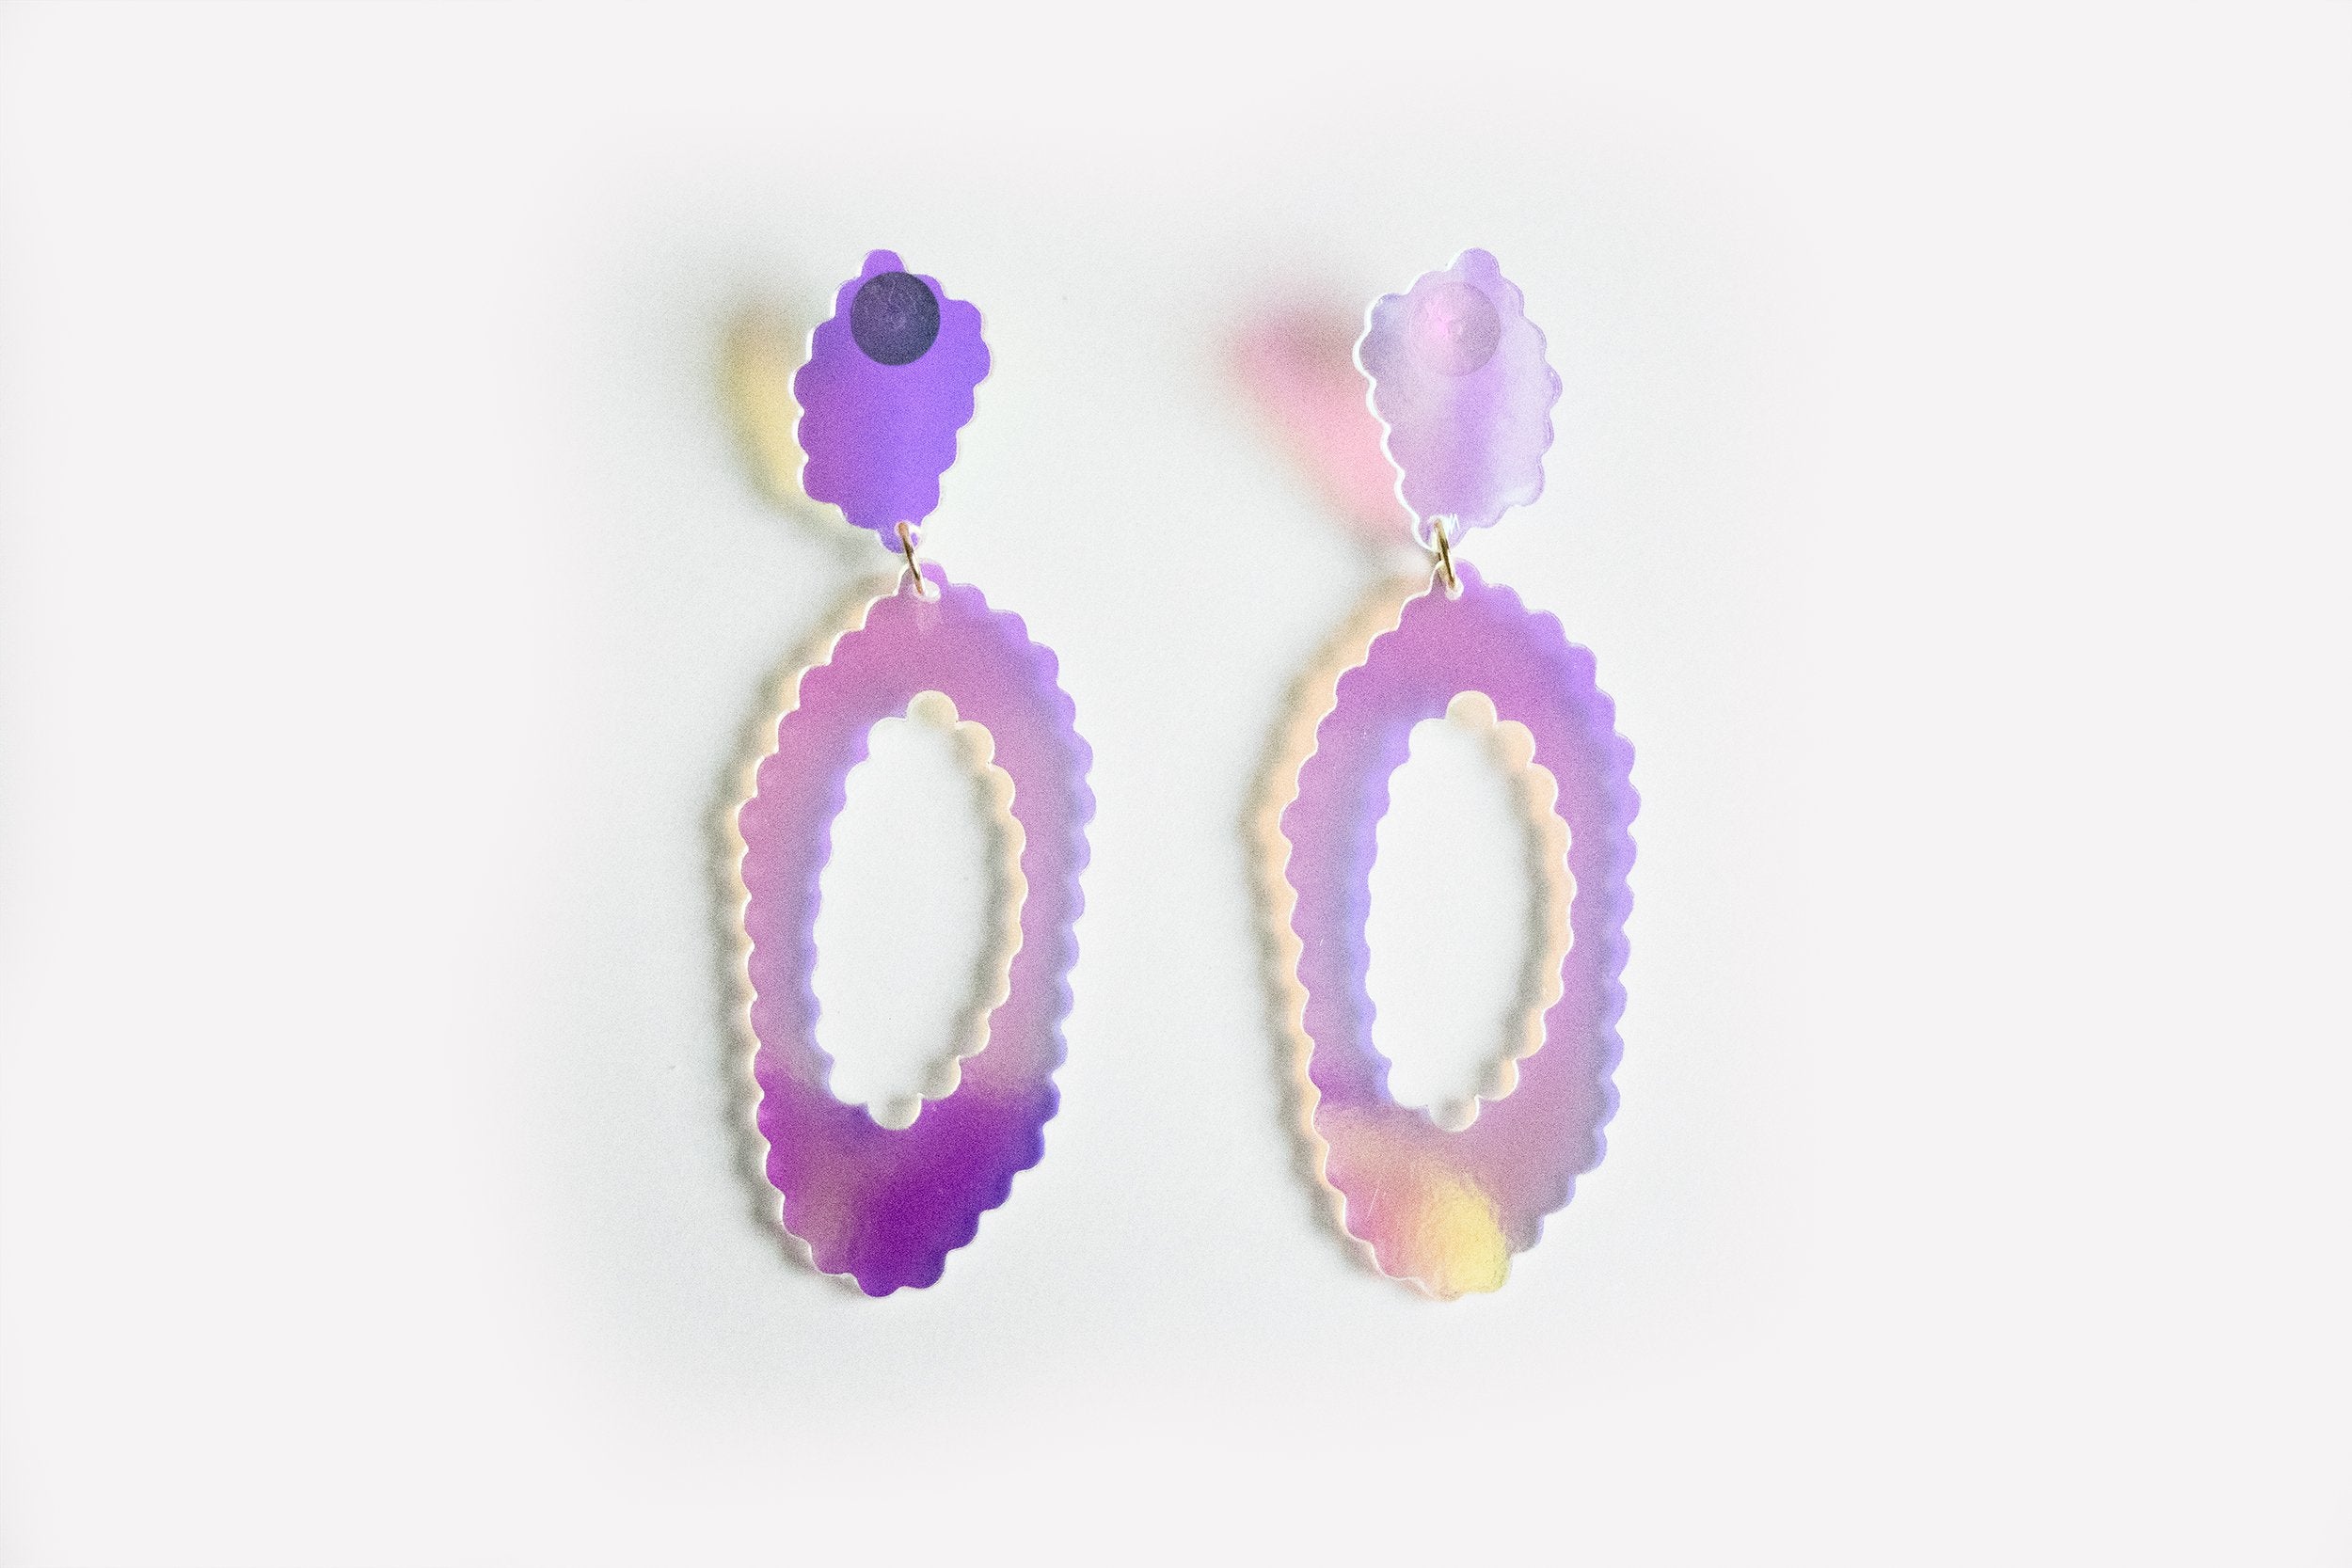 Ecoresin Scallop Earrings - Large Oval